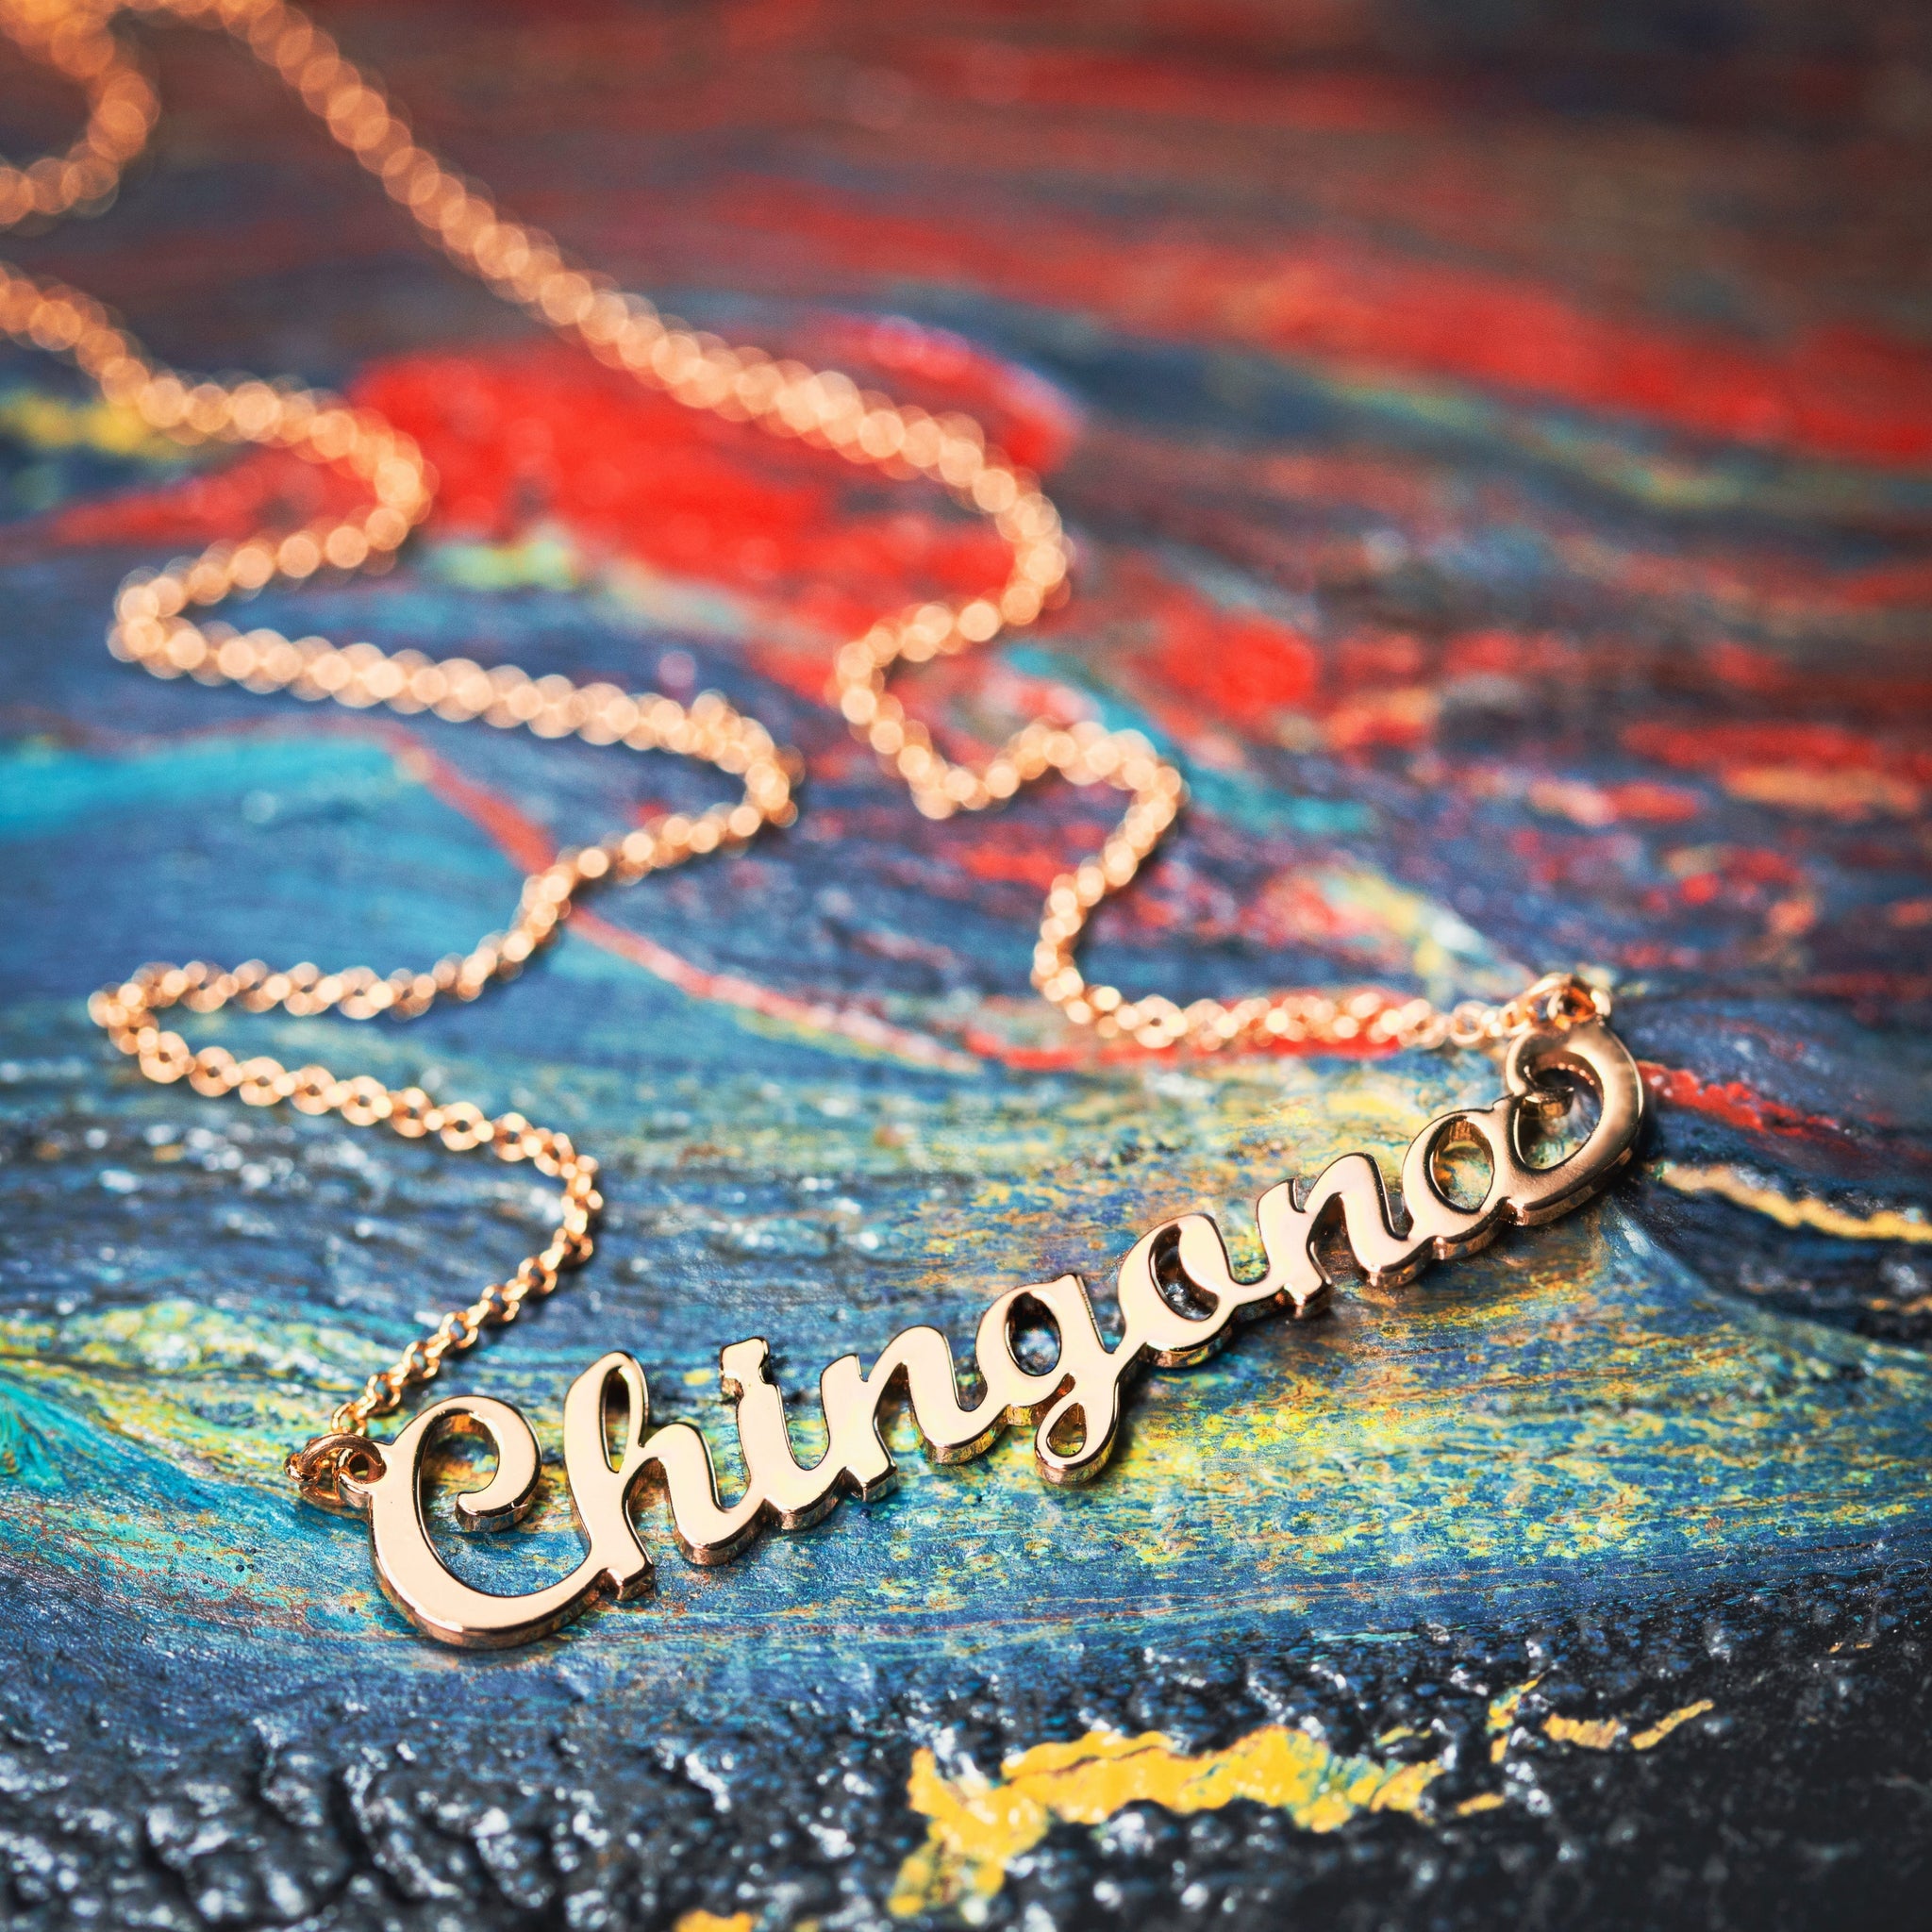 Elegant sterling silver women's necklace plated in gold, featuring the word 'Chingona' in a cursive font.